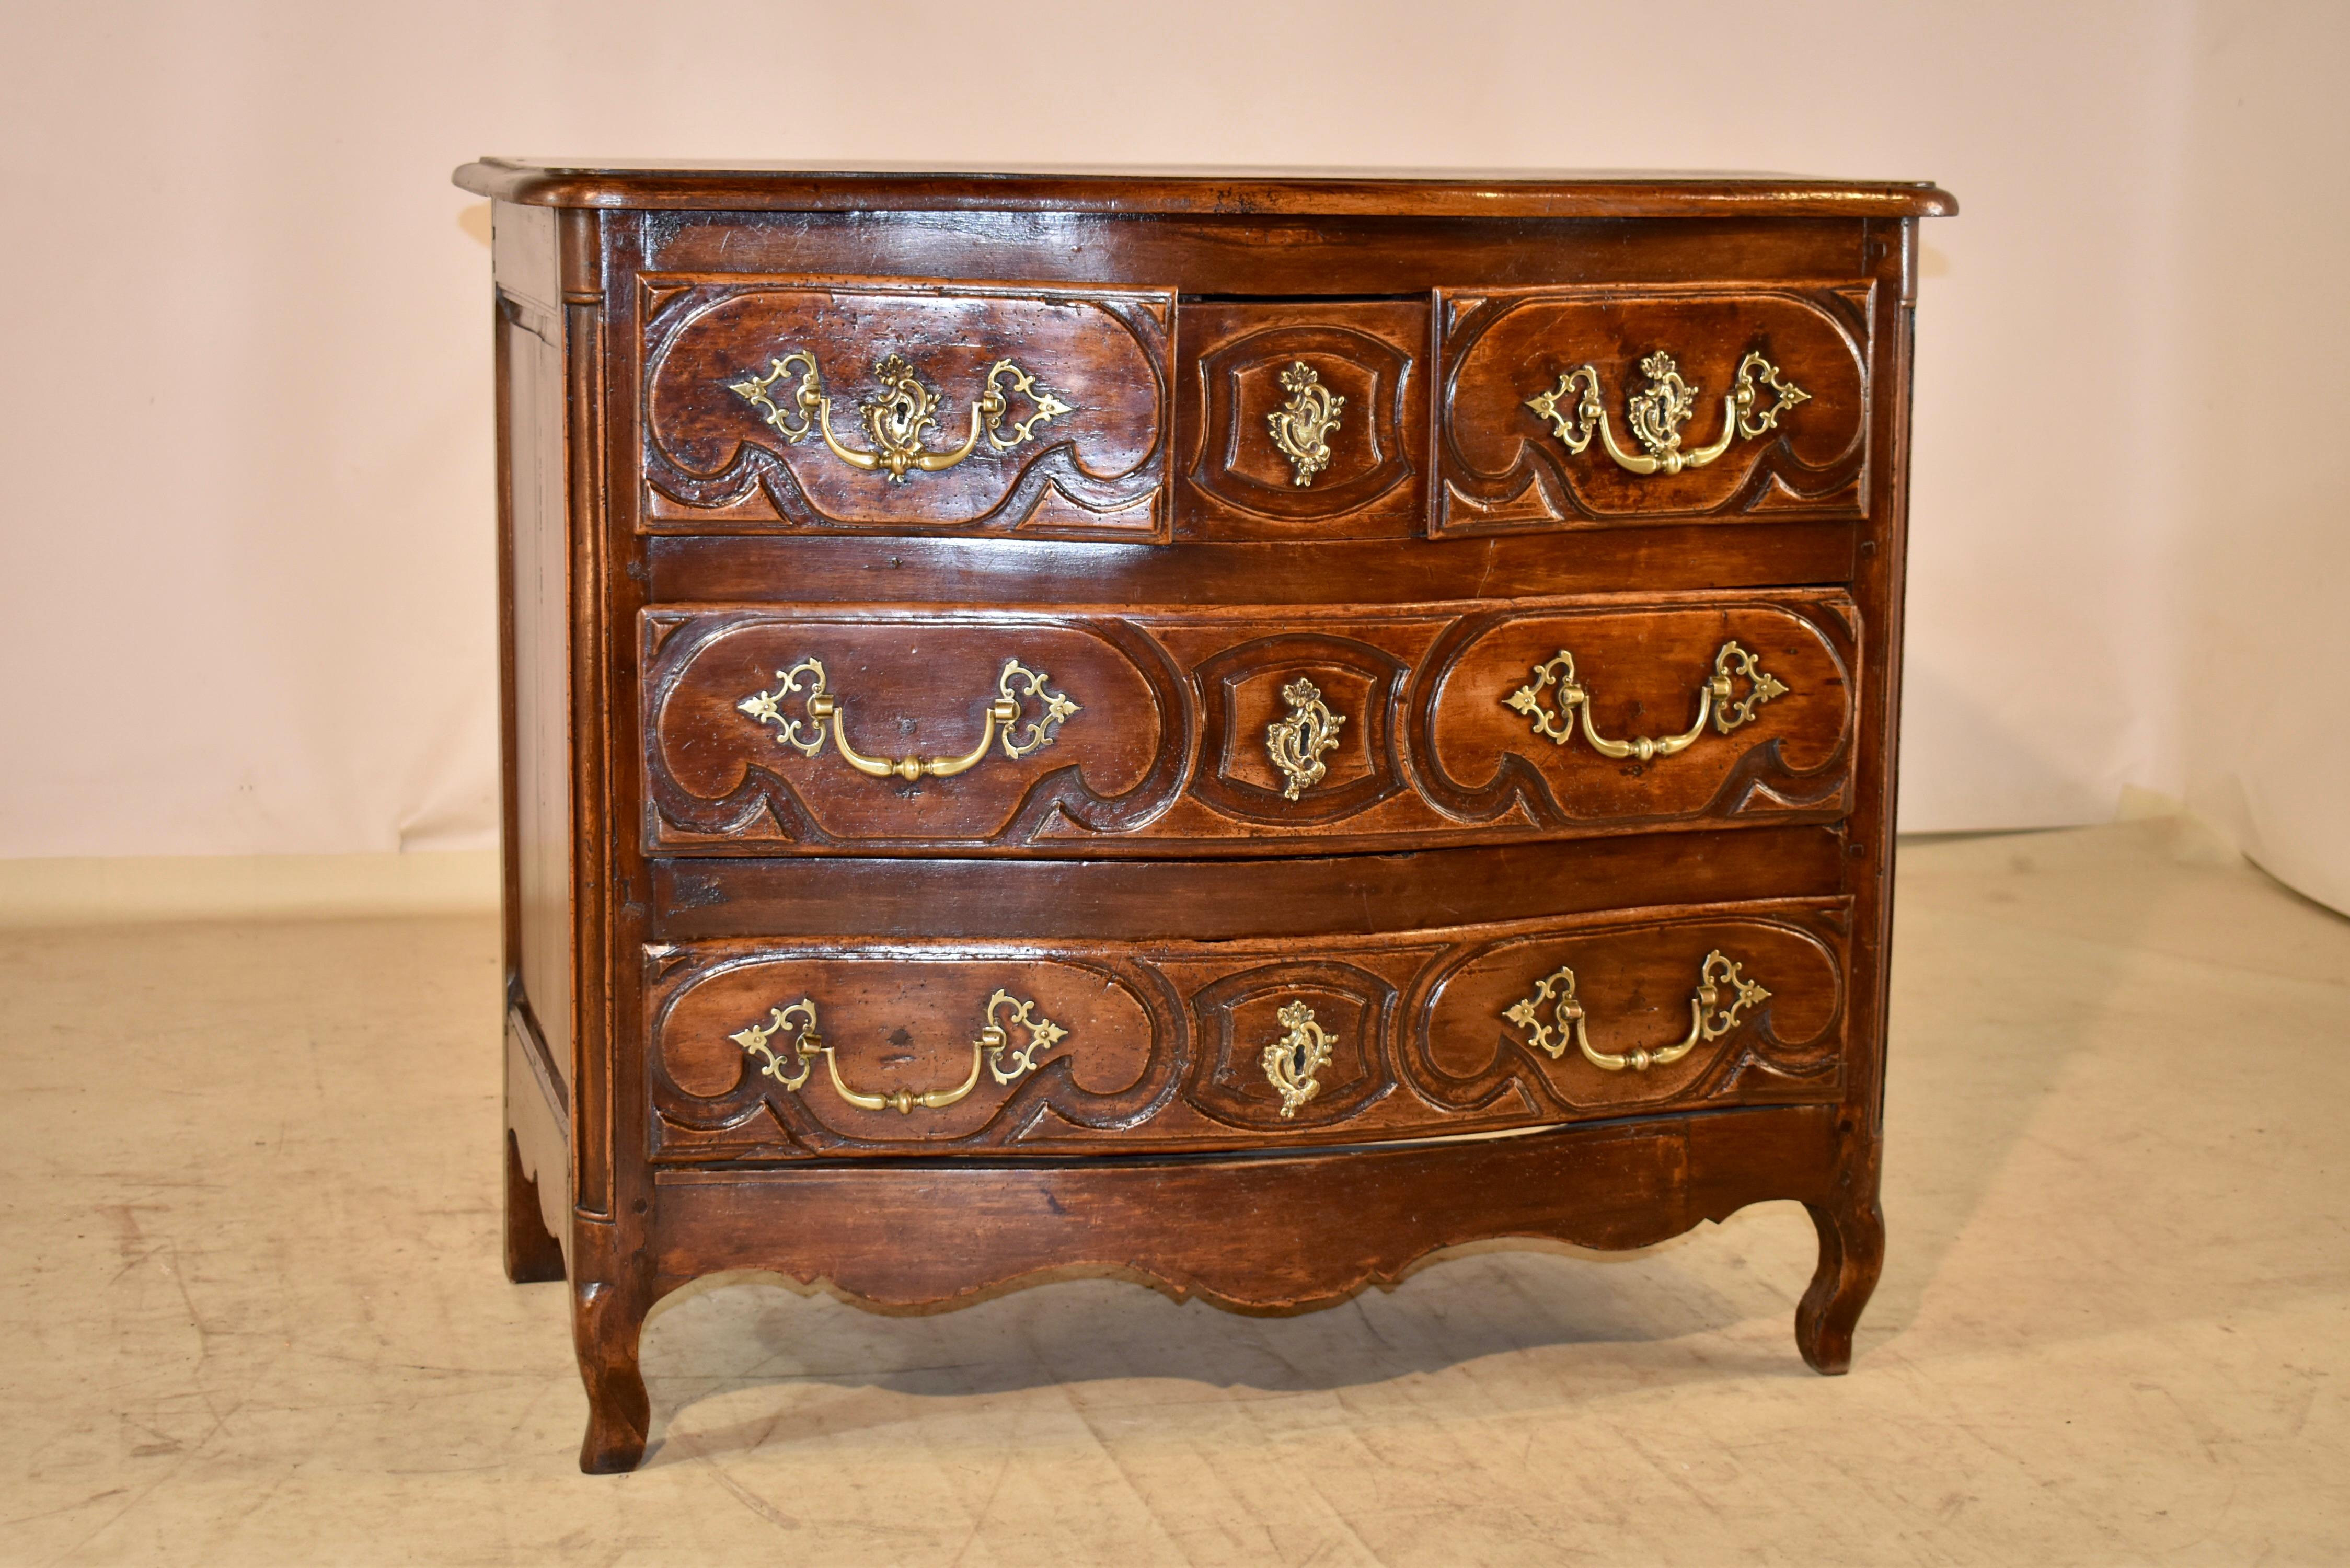 18th century French chest of drawers made from oak and walnut.  The top is made from oak and has a serpentine and beveled edge around the top, following down to beautifully hand paneled sides with scalloping on the skirt.  The chest has three